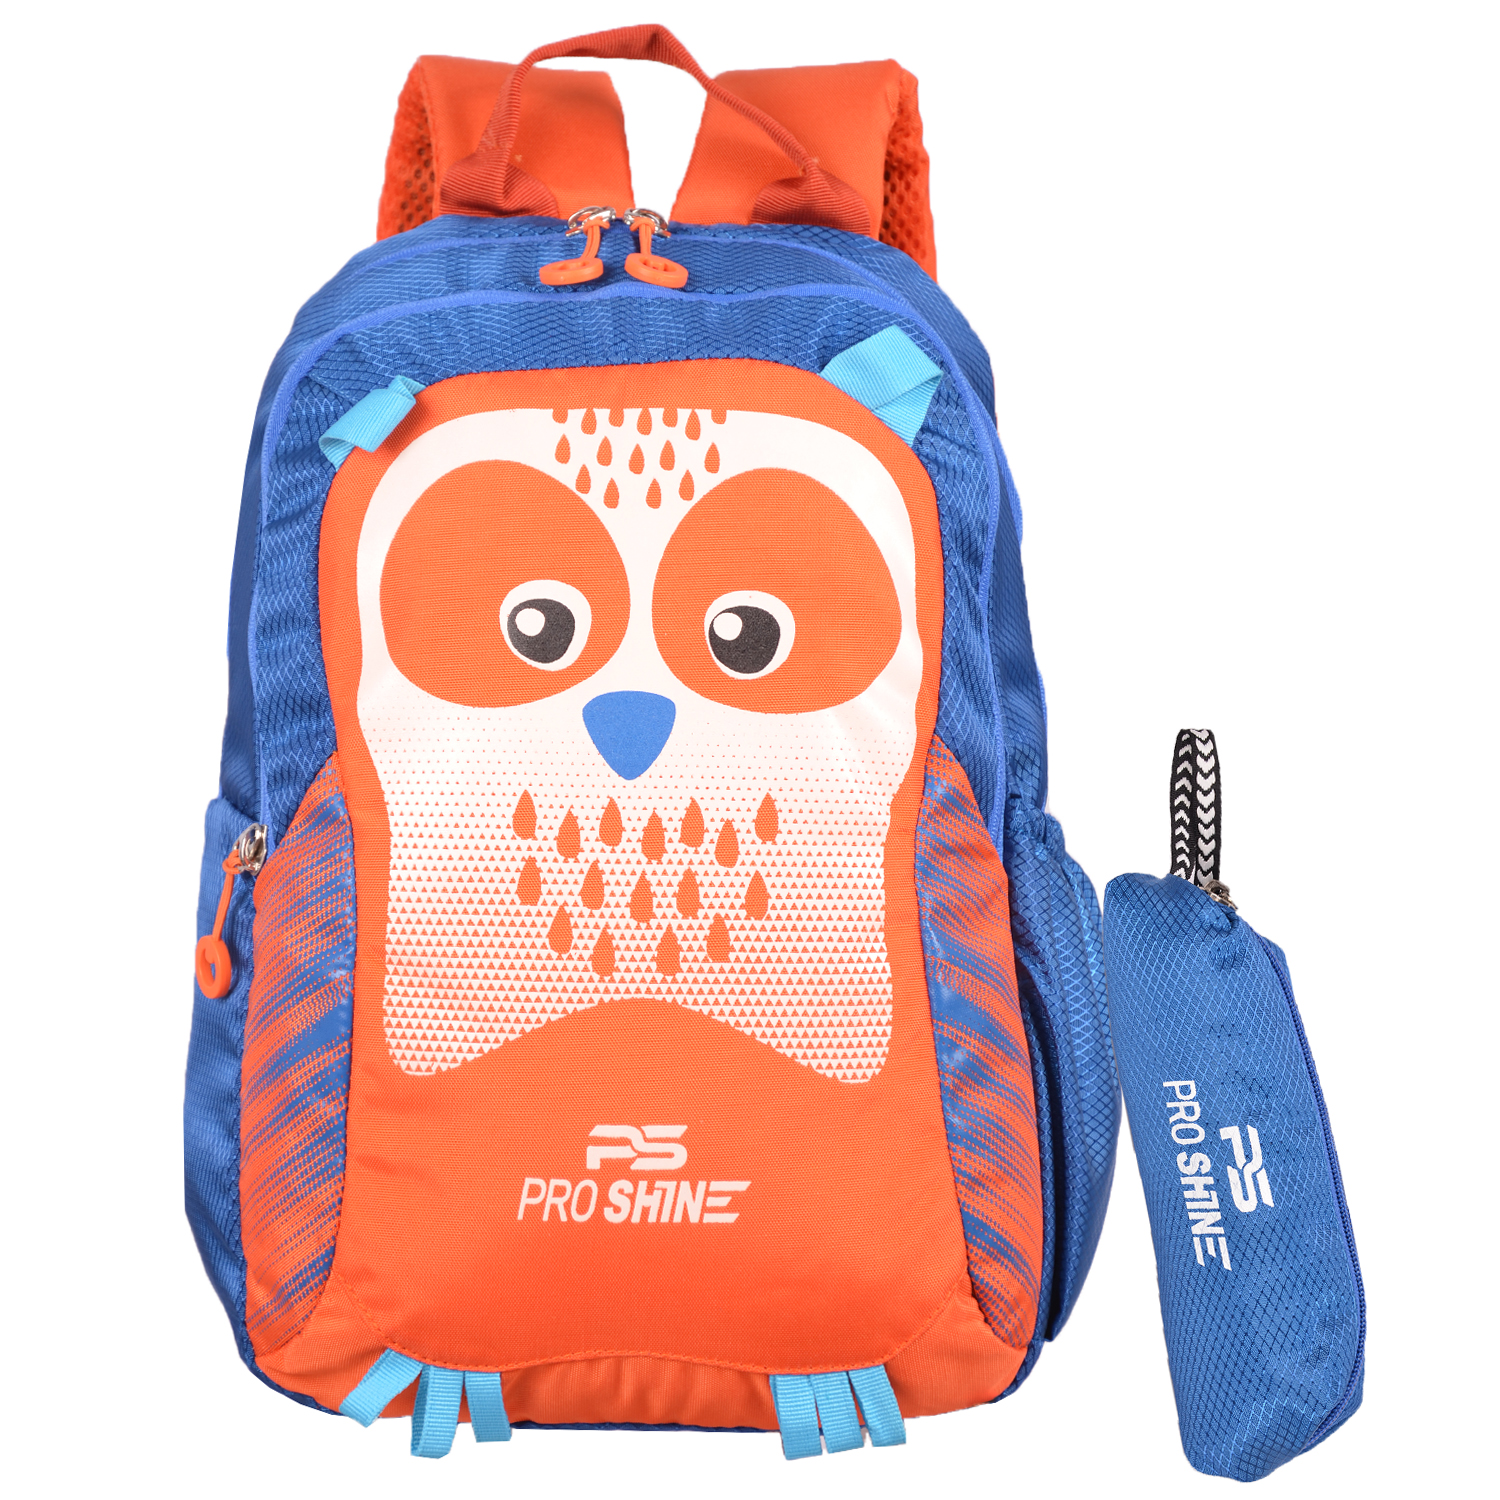 RoshanBags_PROSHINE 14L KIDS SCHOOL BAG FOR KG A0137 ORANGE WITH POUCH